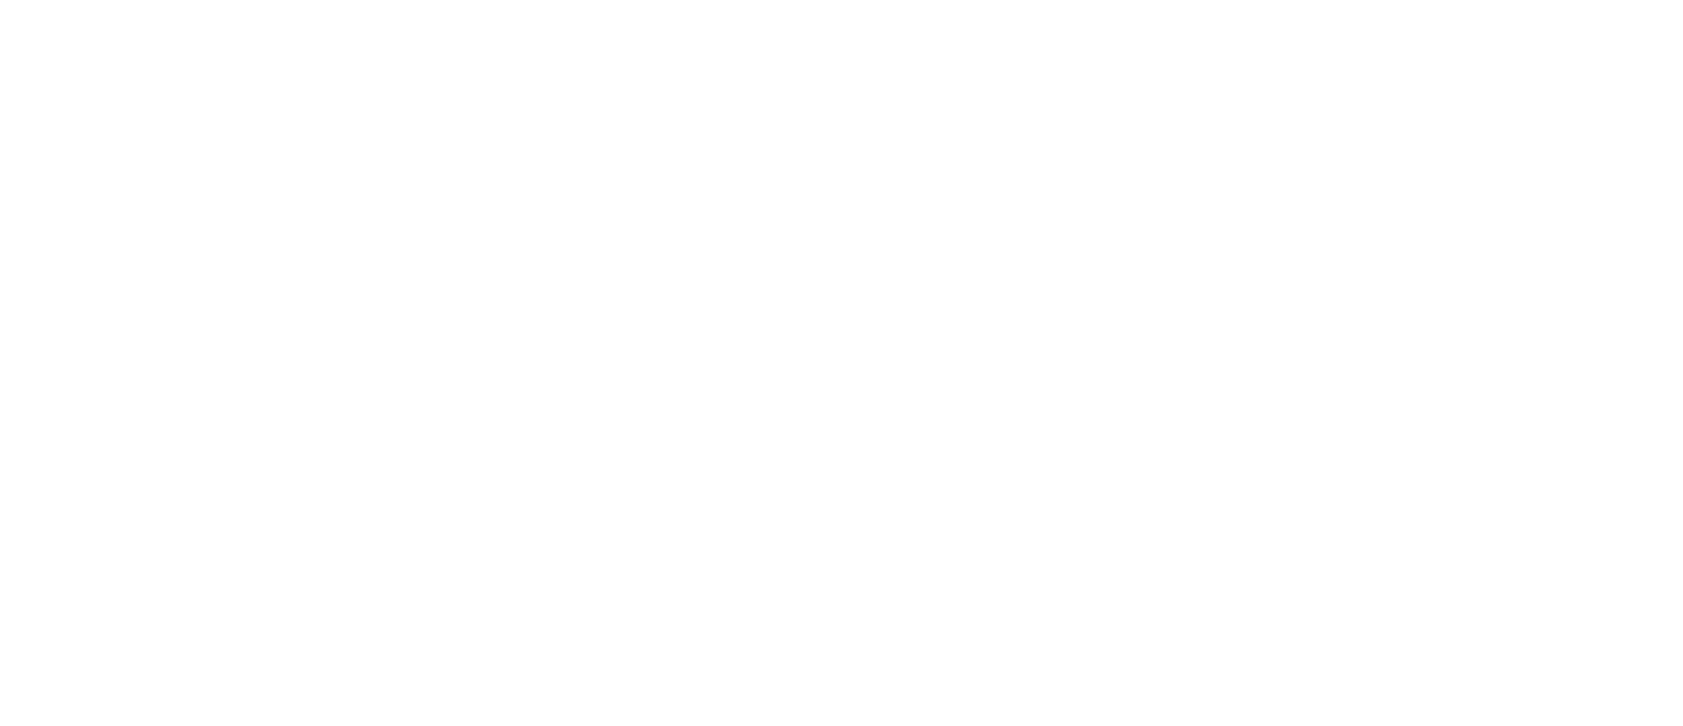 Angus Dundee Distillers plc